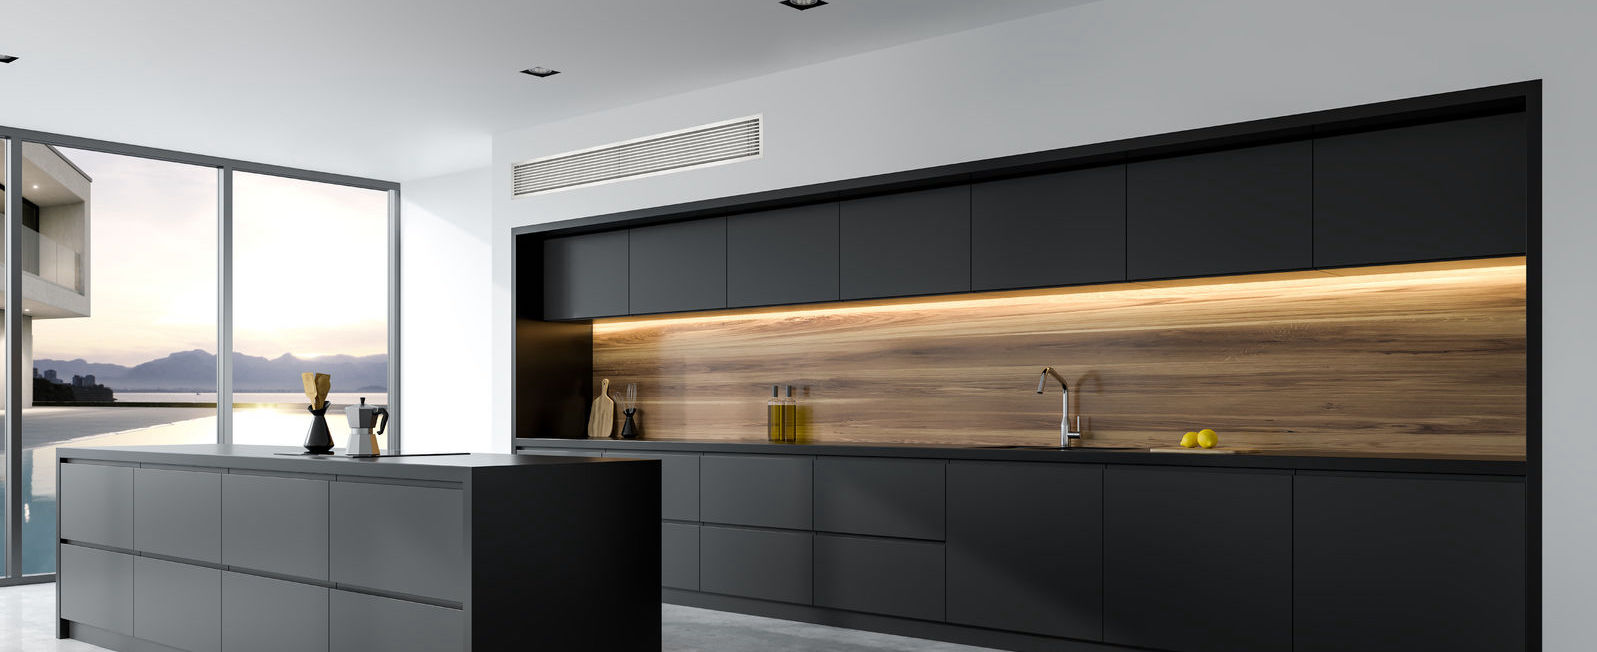 Home Ducted Air Conditioner Penrith Kitchen